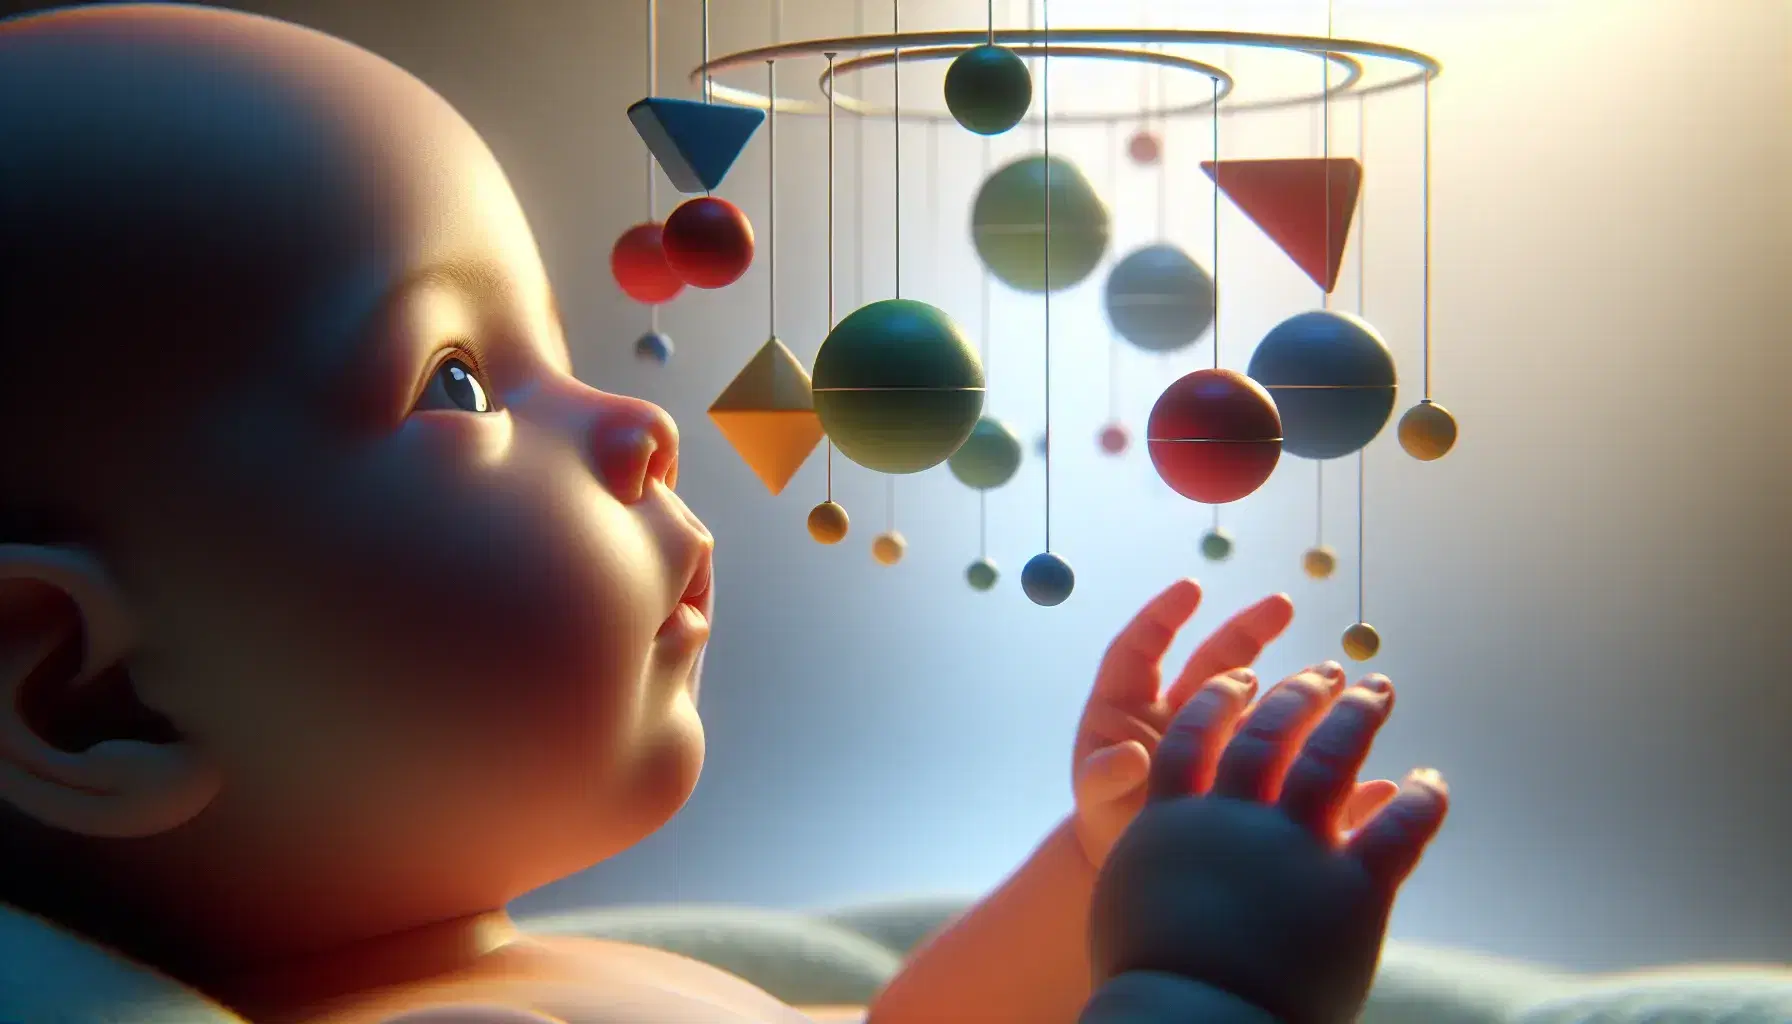 Face of a newborn baby looking with curiosity at a piece of furniture with suspended colored geometric shapes, in a serene environment tinged with blue.